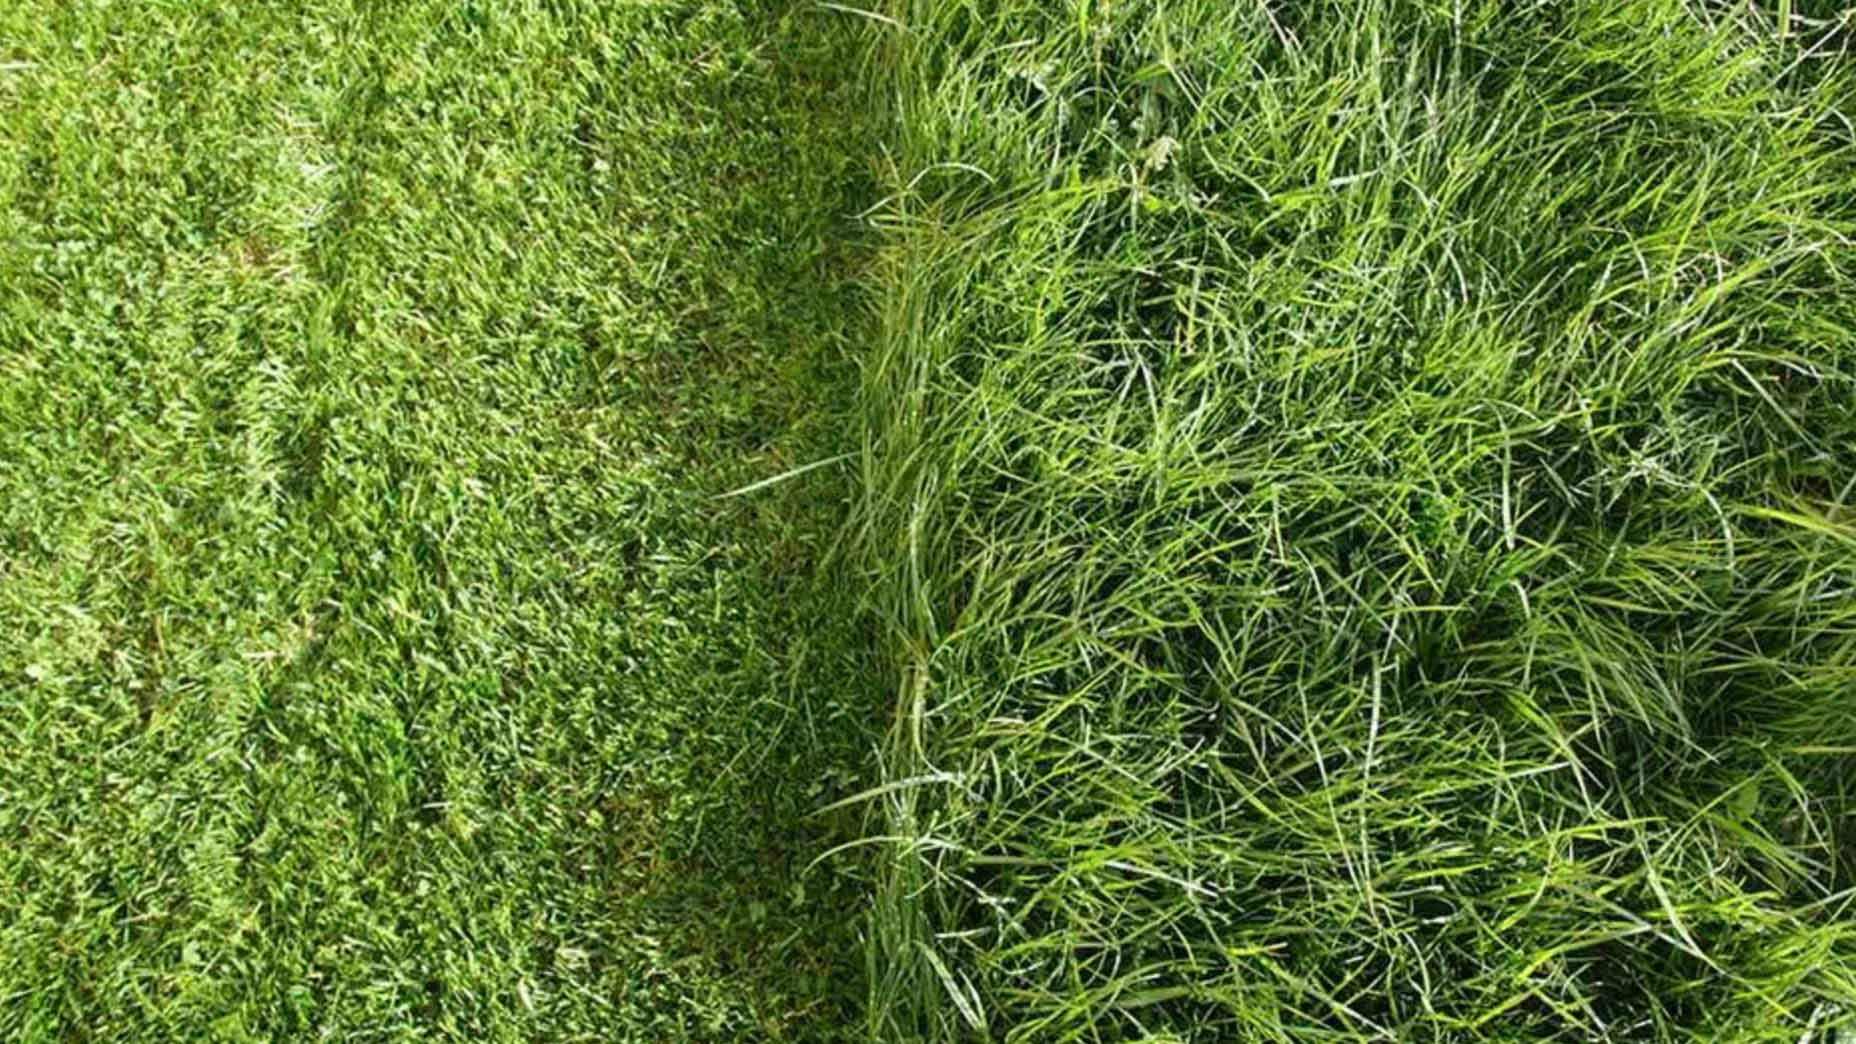 The best way to mow your lawn, according to a golf-course superintendent